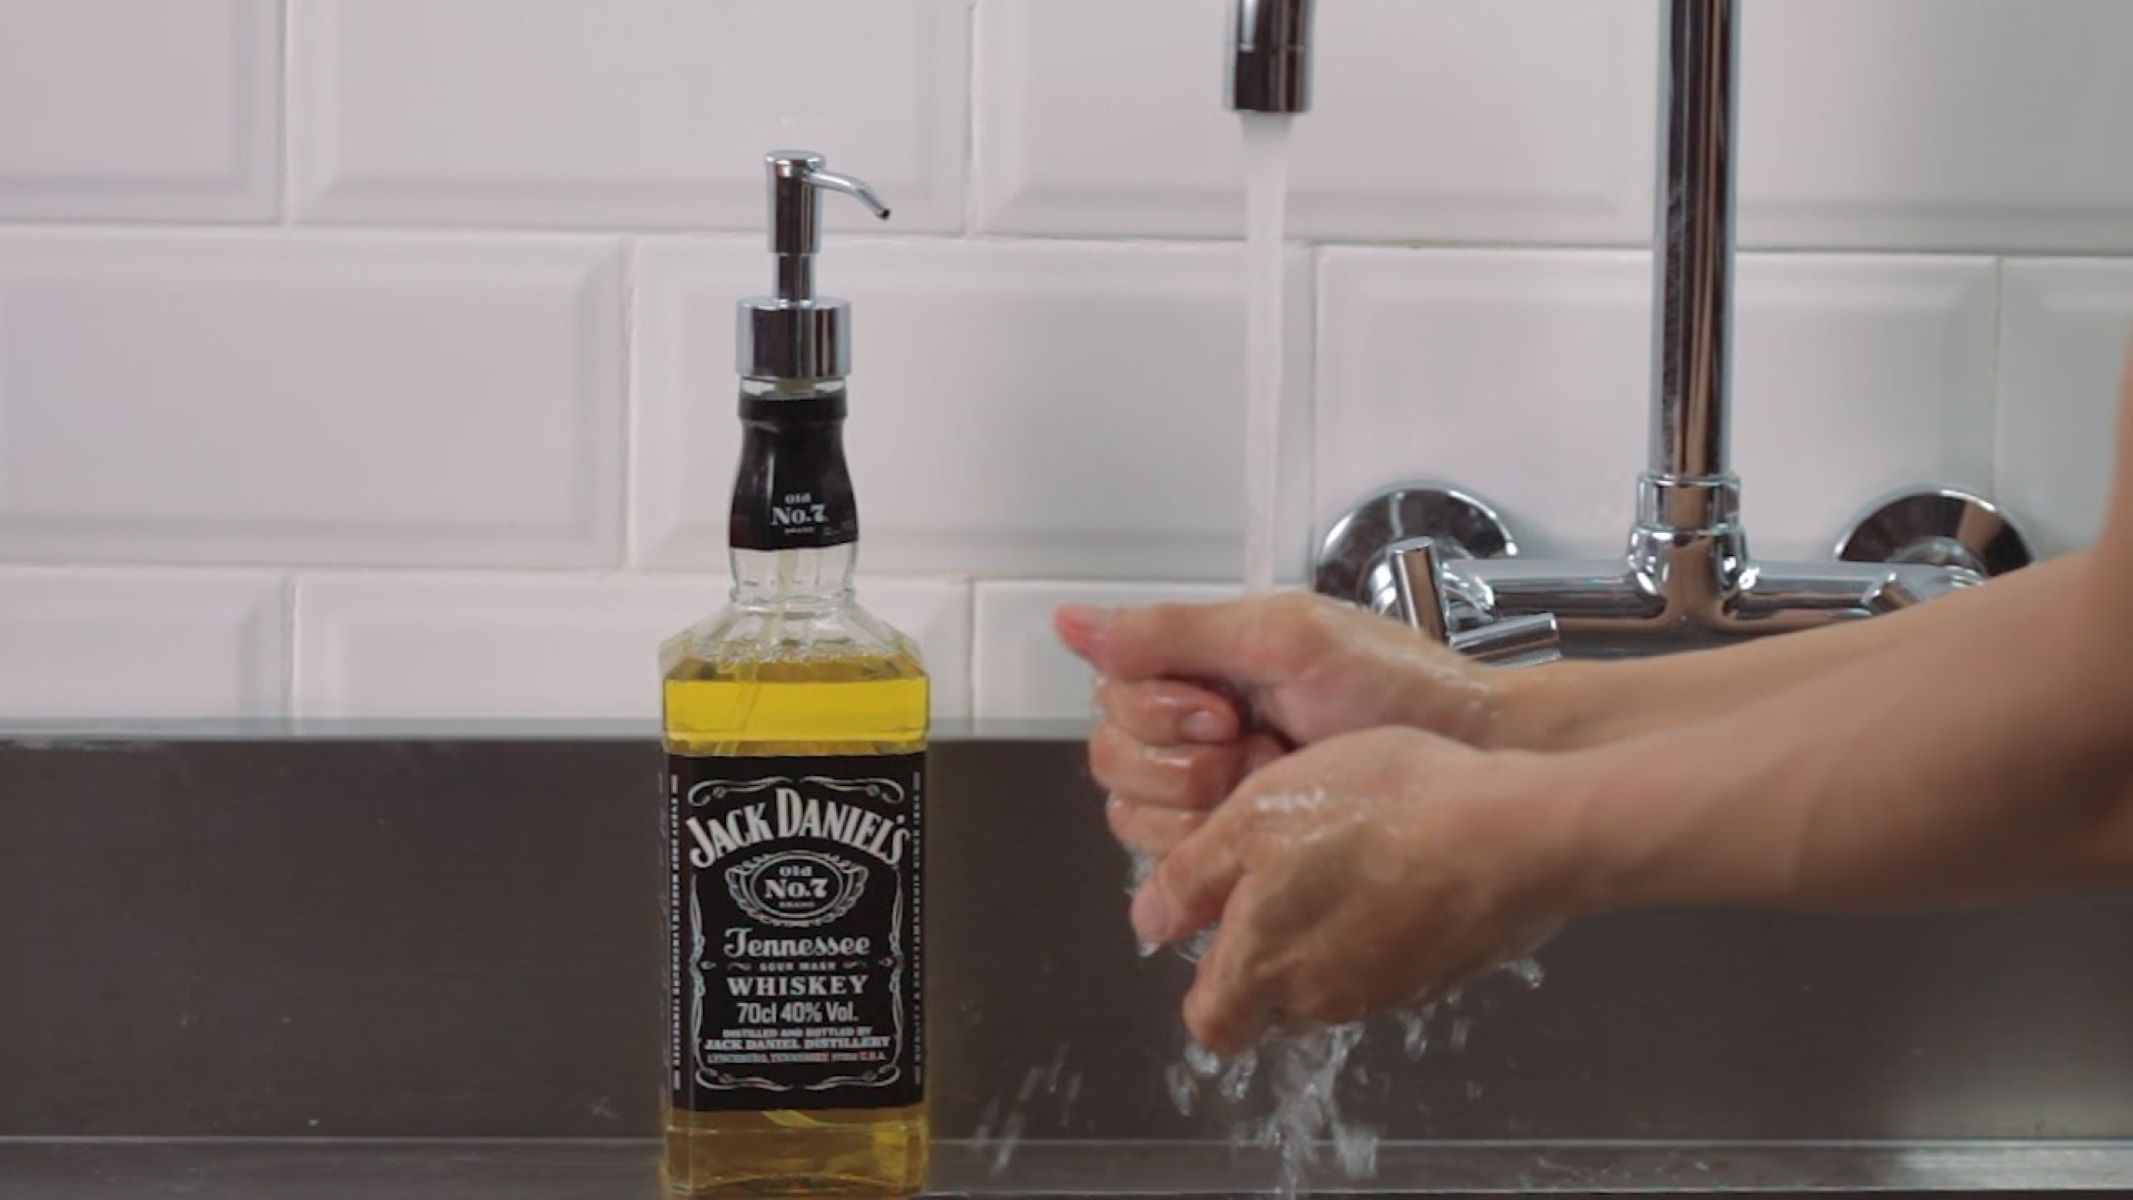 How To Make A Soap Dispenser Out Of A Jack Daniels Bottle